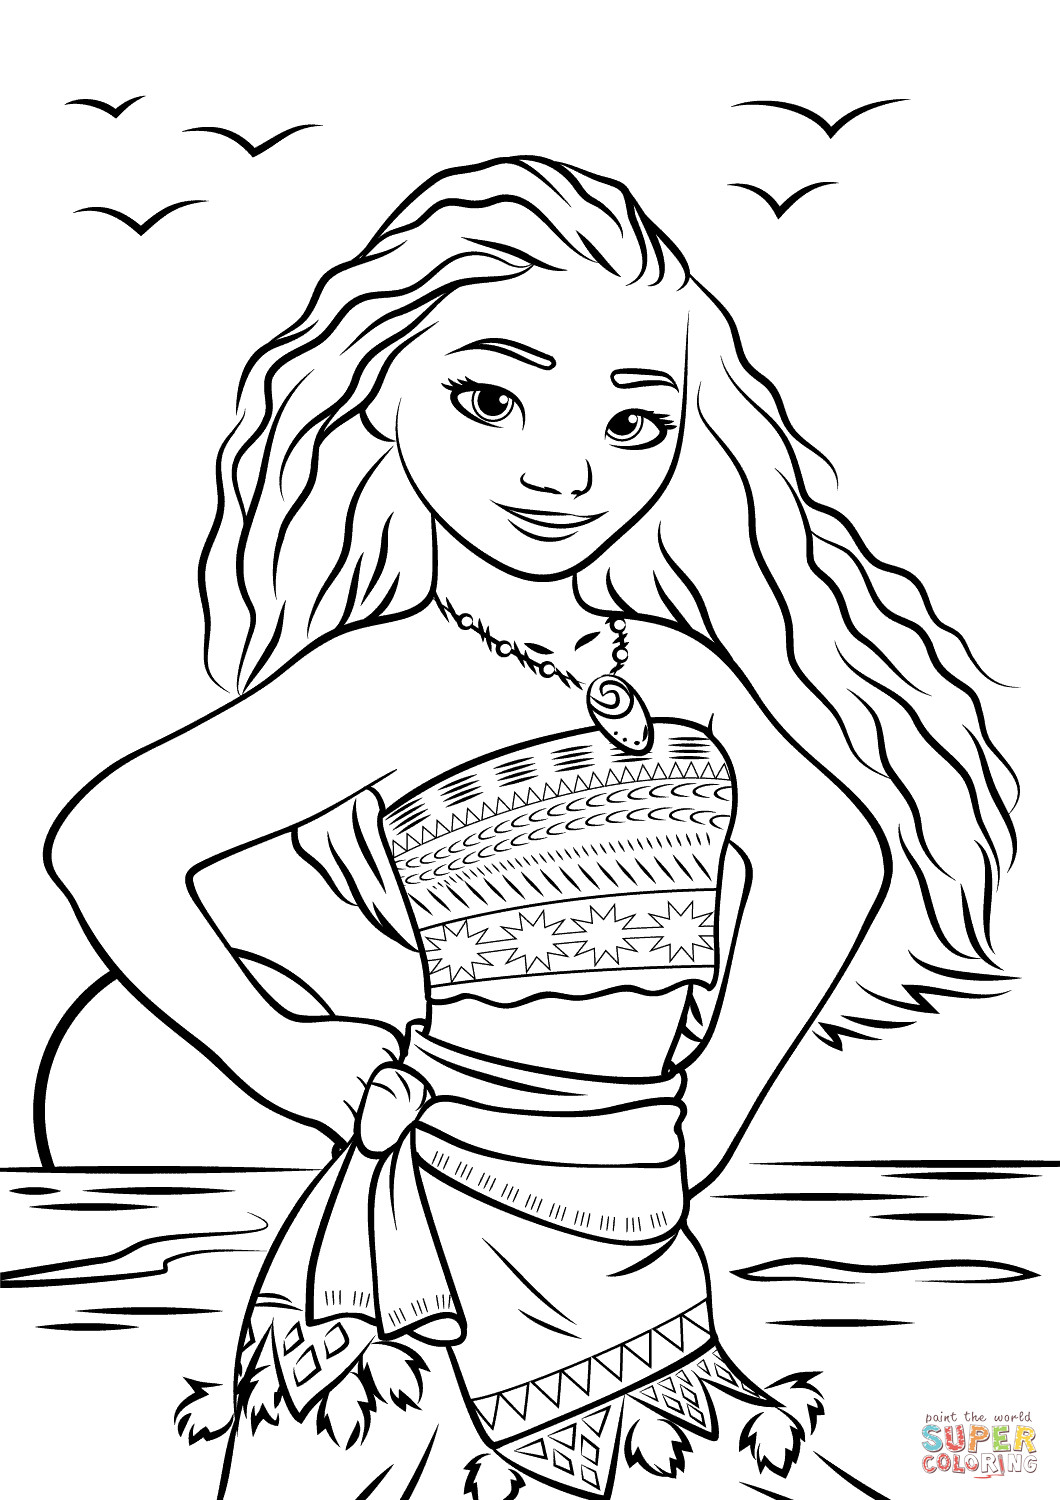 Moana Coloring Pages For Kids
 Moana Waialiki coloring page